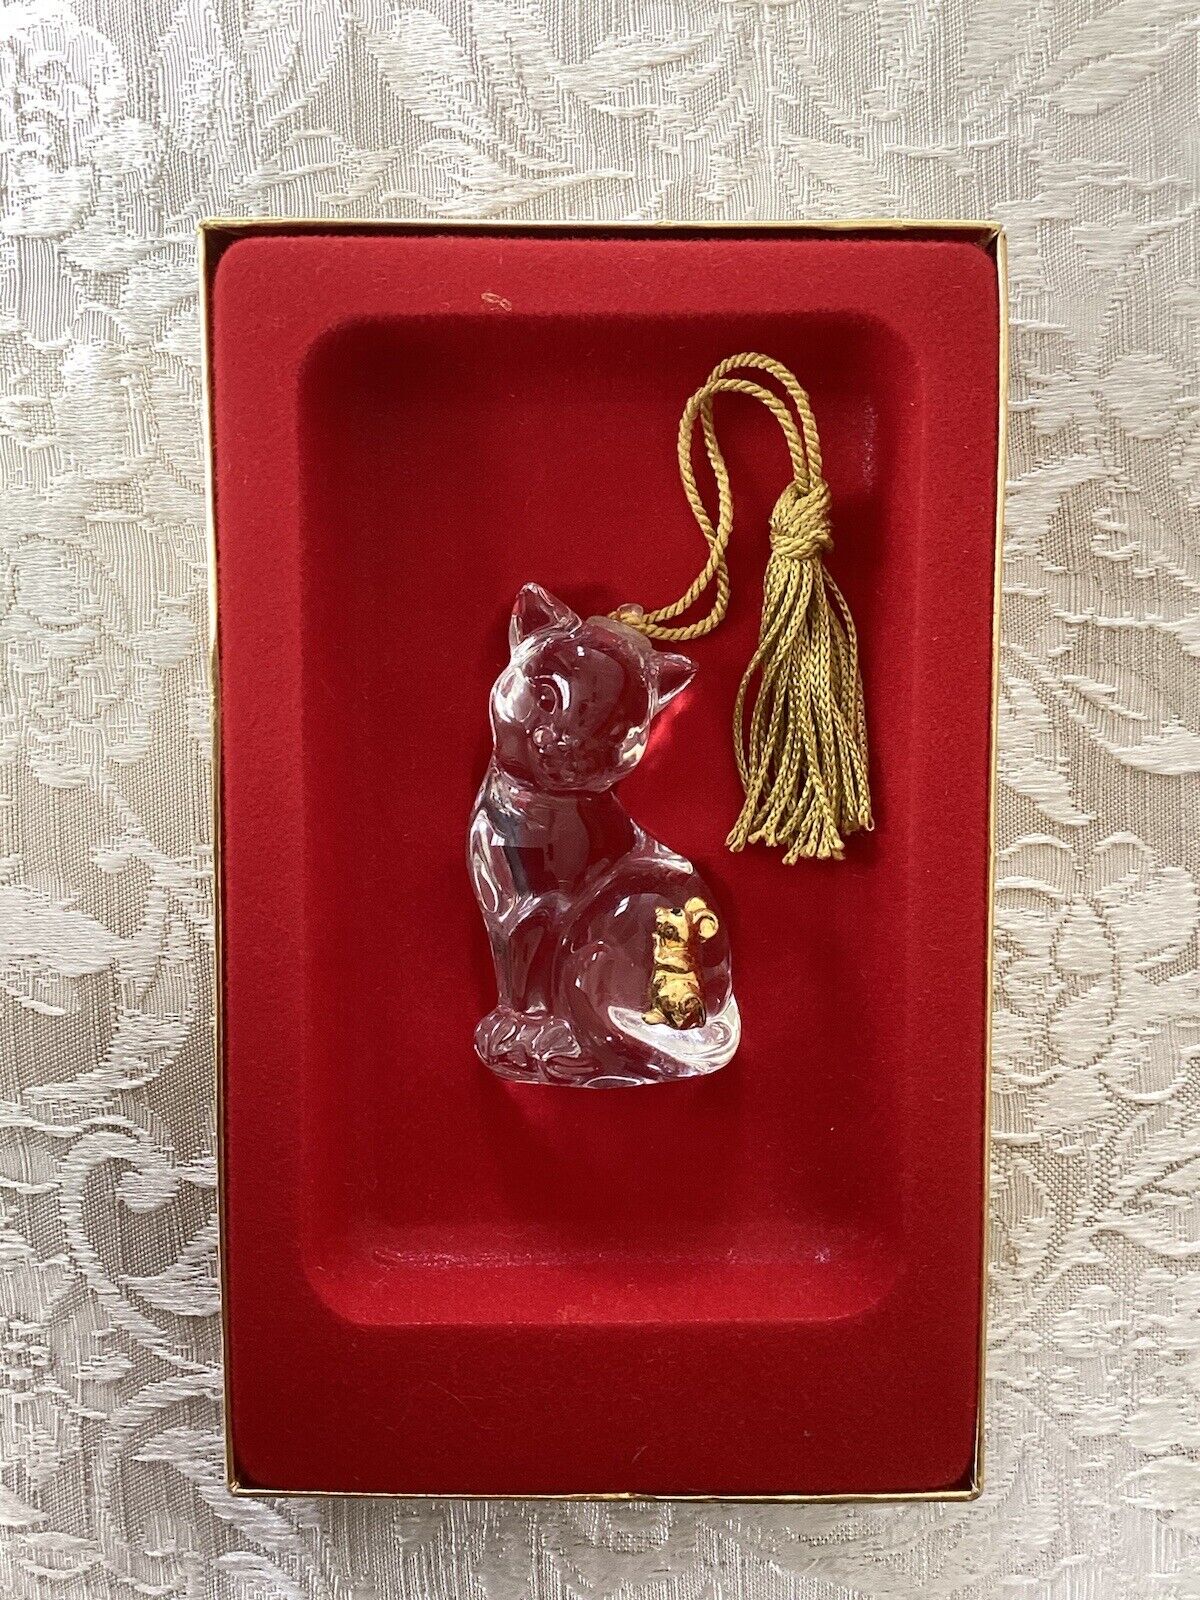 Gorham Antique Gold Cat’s Best Friend Full Lead Crystal Christmas Ornament NEW